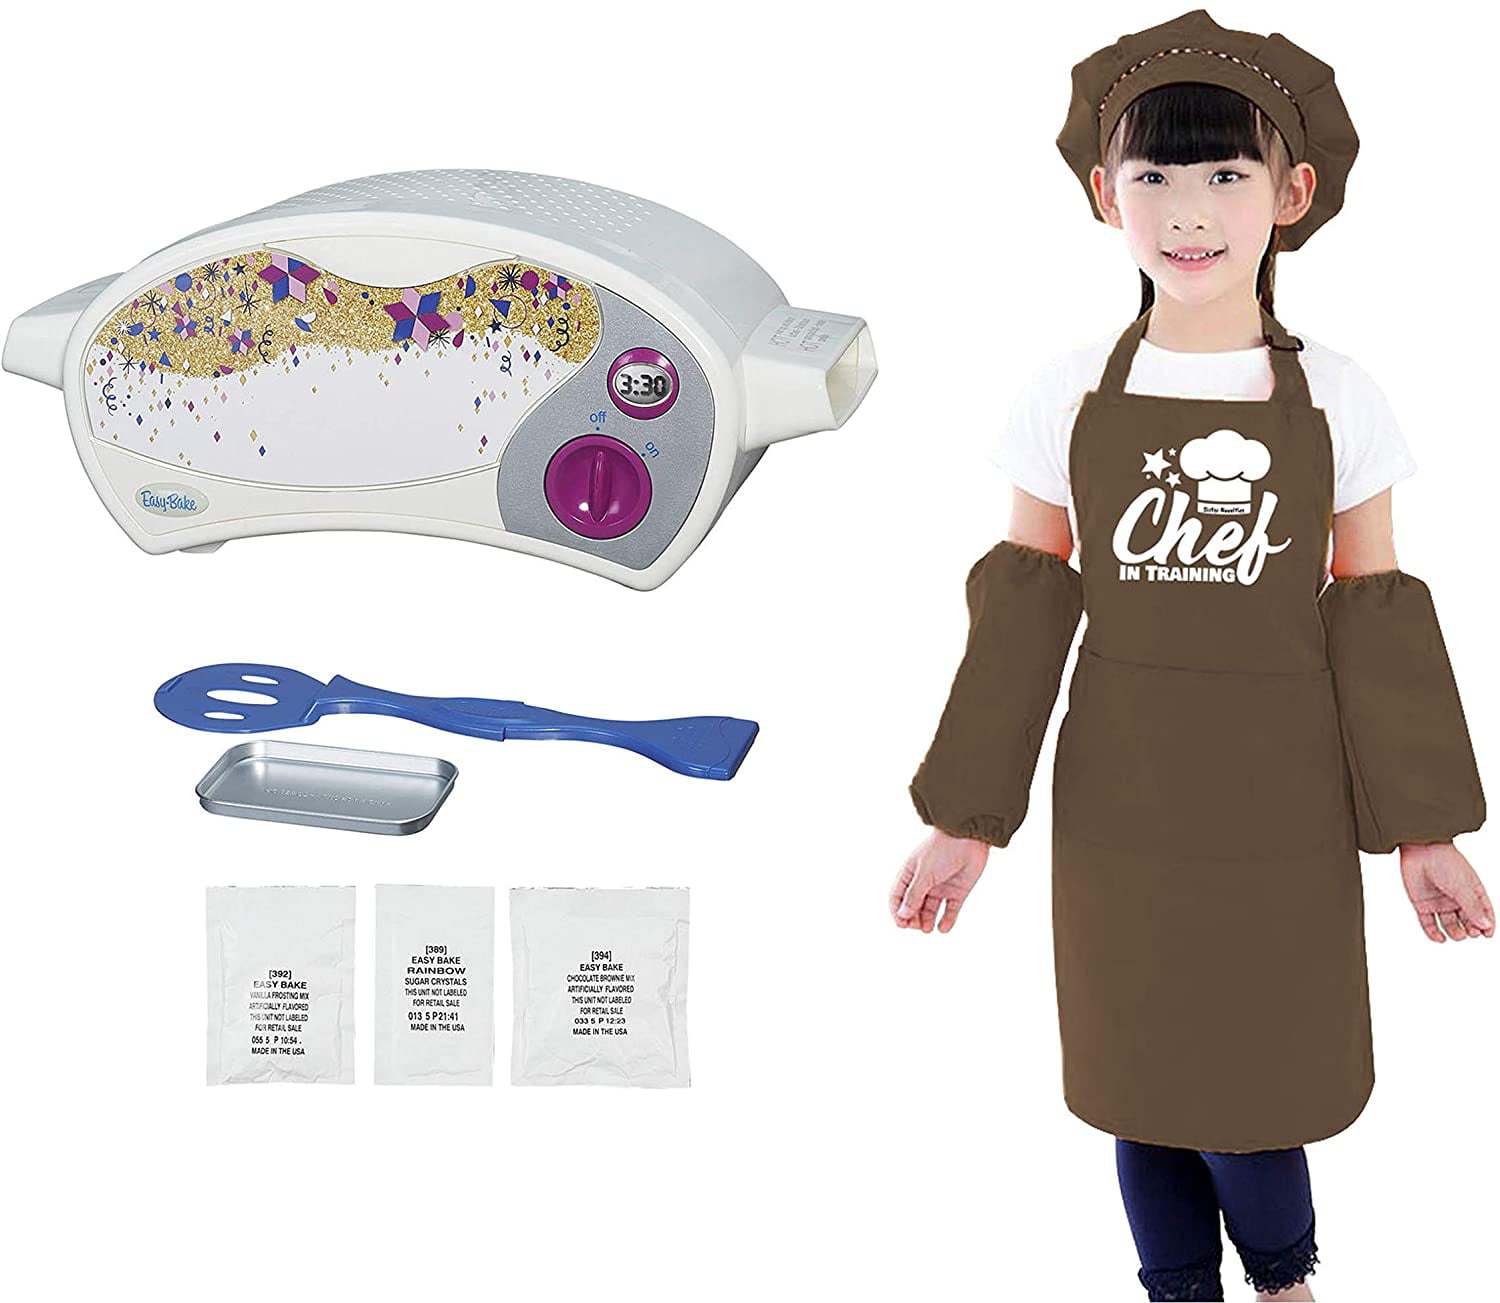 Kids Chef Hat and Apron Easy Bake Oven Set Easy Bake Oven with Kids Kitchen Apron with Chef Hat and Sleeves Aprons for Kids Green Aprons Set + Easy Bake Oven Kids Aprons for Girls and Boys 